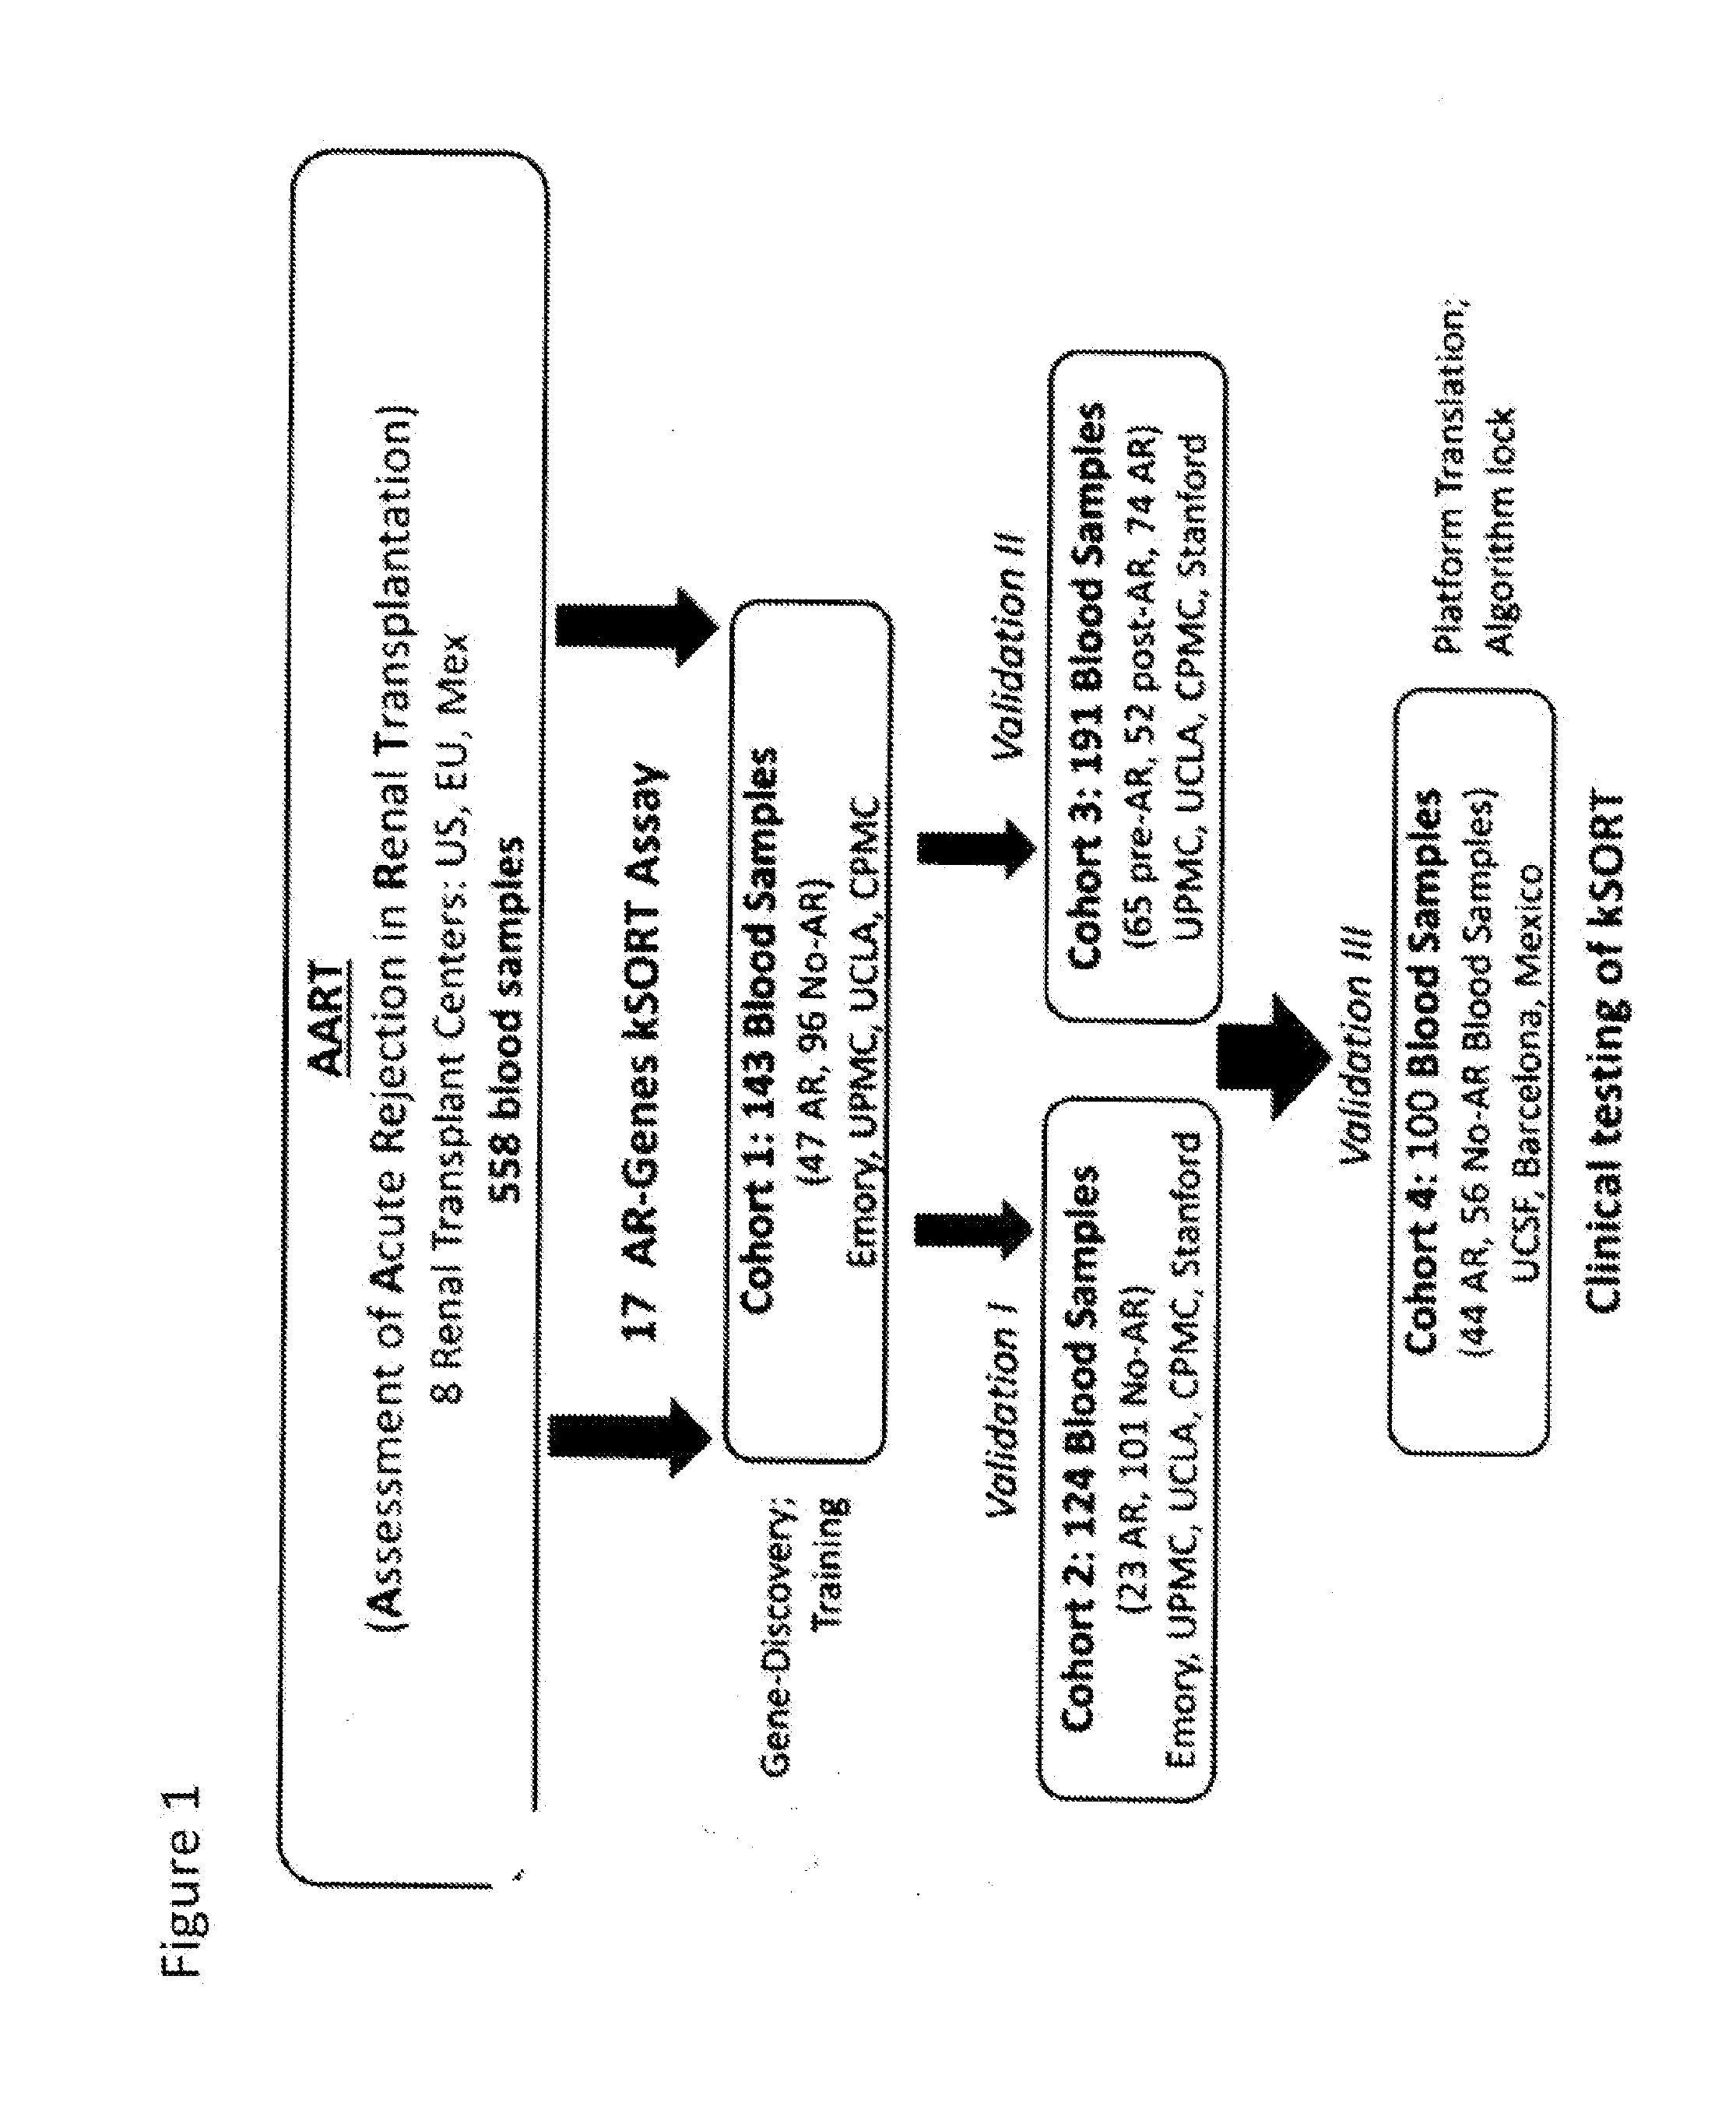 Compositions and methods for assessing acute rejection in renal transplantation